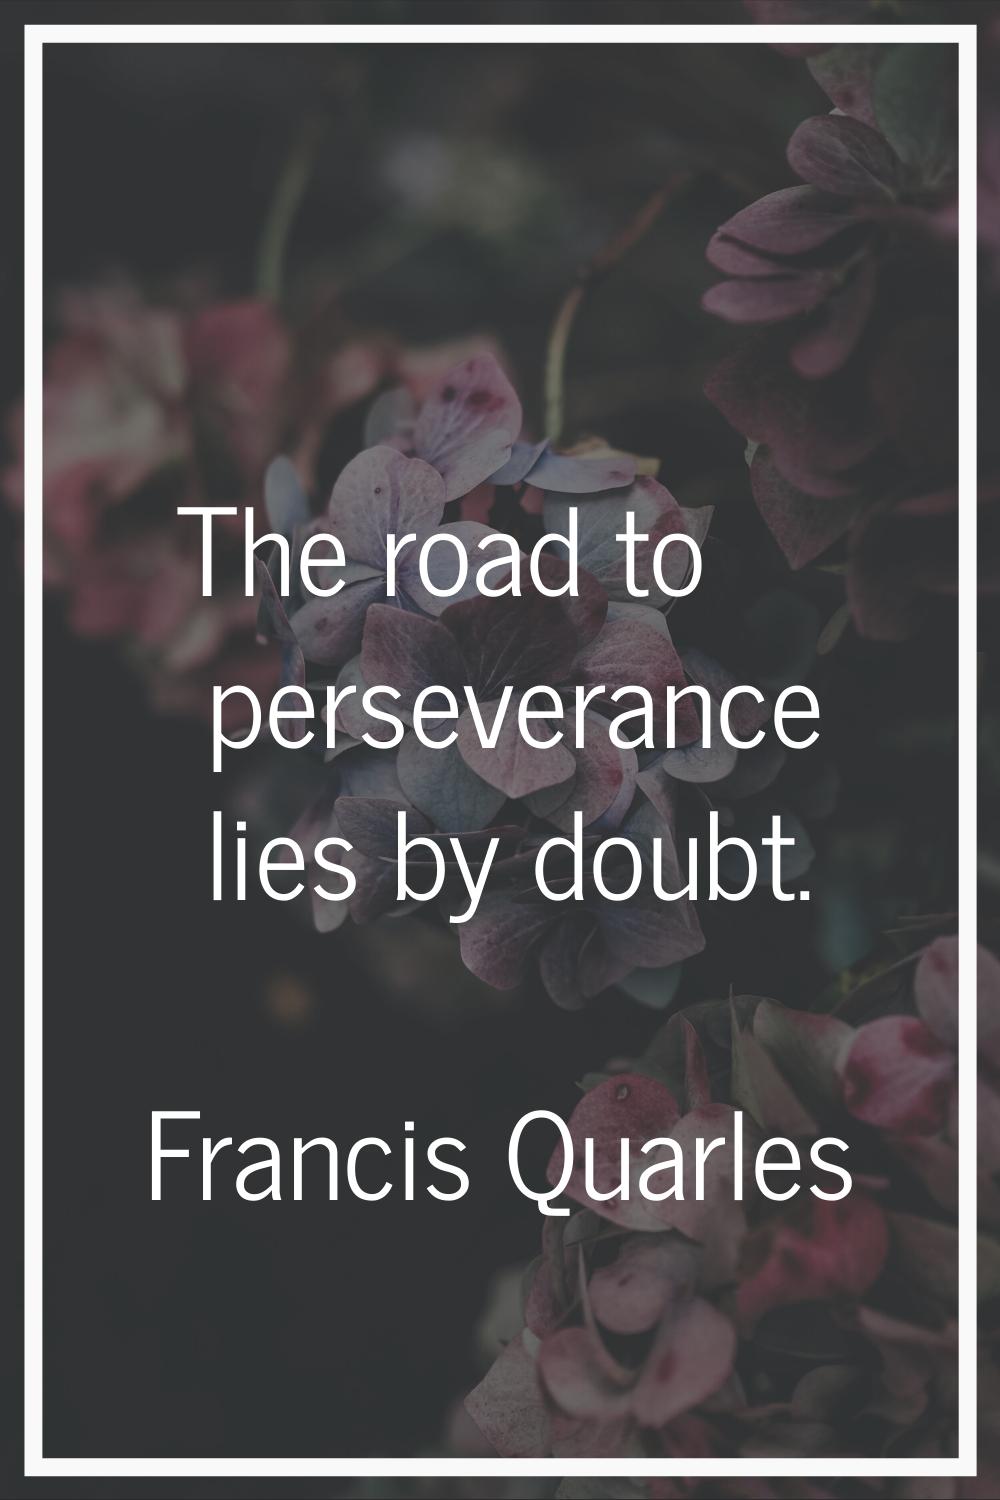 The road to perseverance lies by doubt.